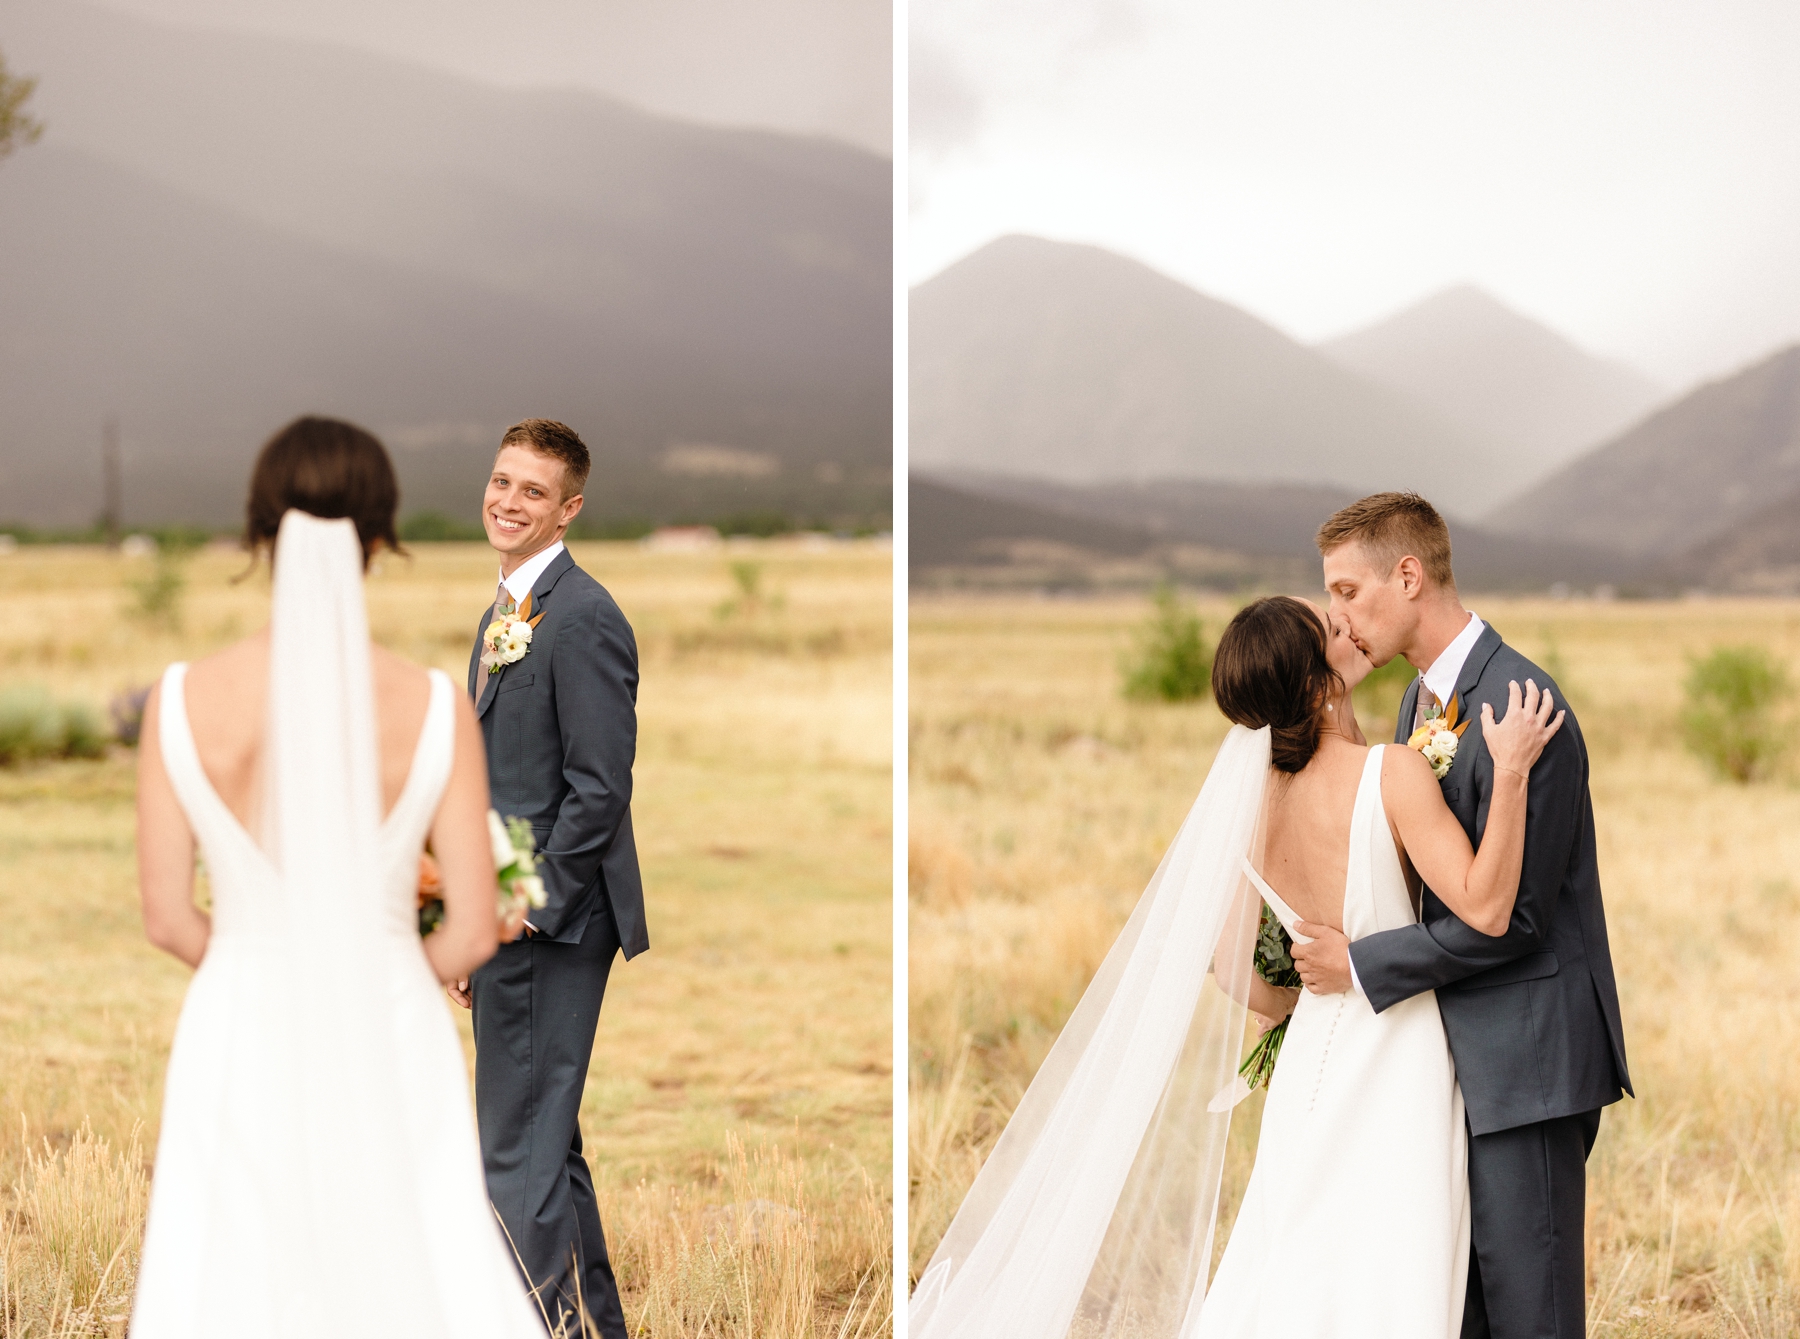 Groom turning around and seeing bride for the first time | bride and groom kissing in front of mountains